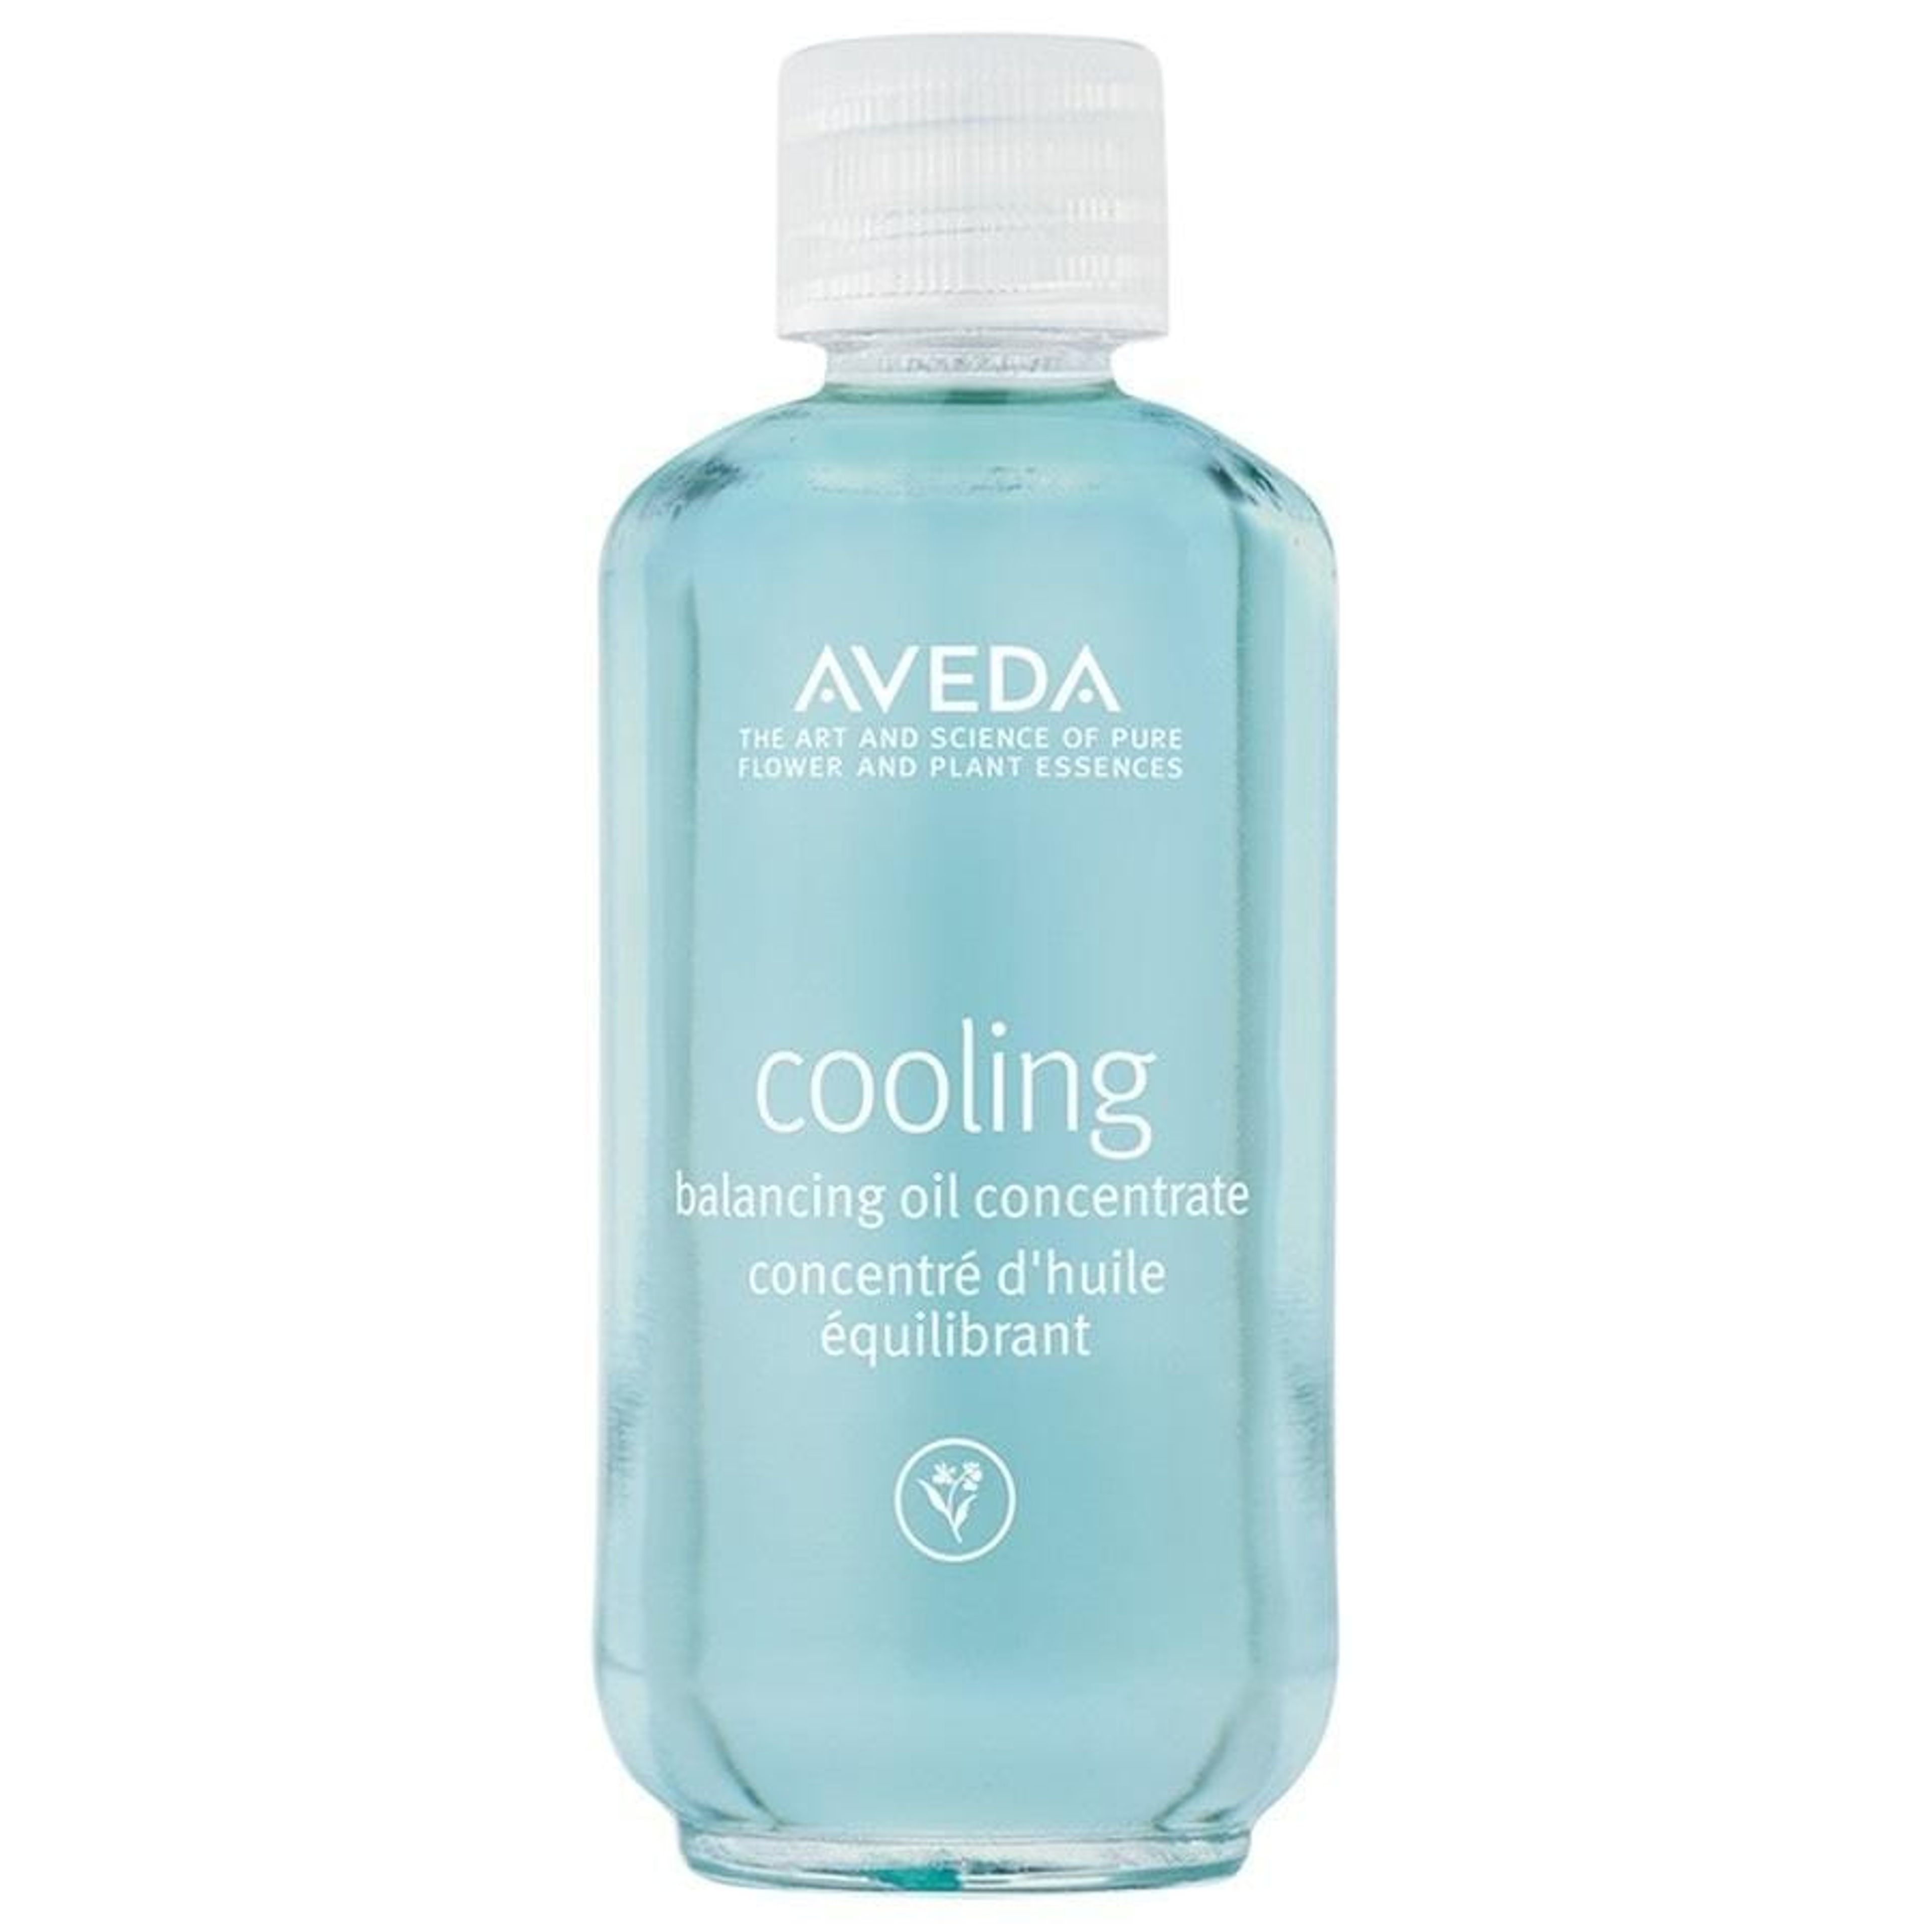 Aveda Cooling Balancing Oil Concentrate 1